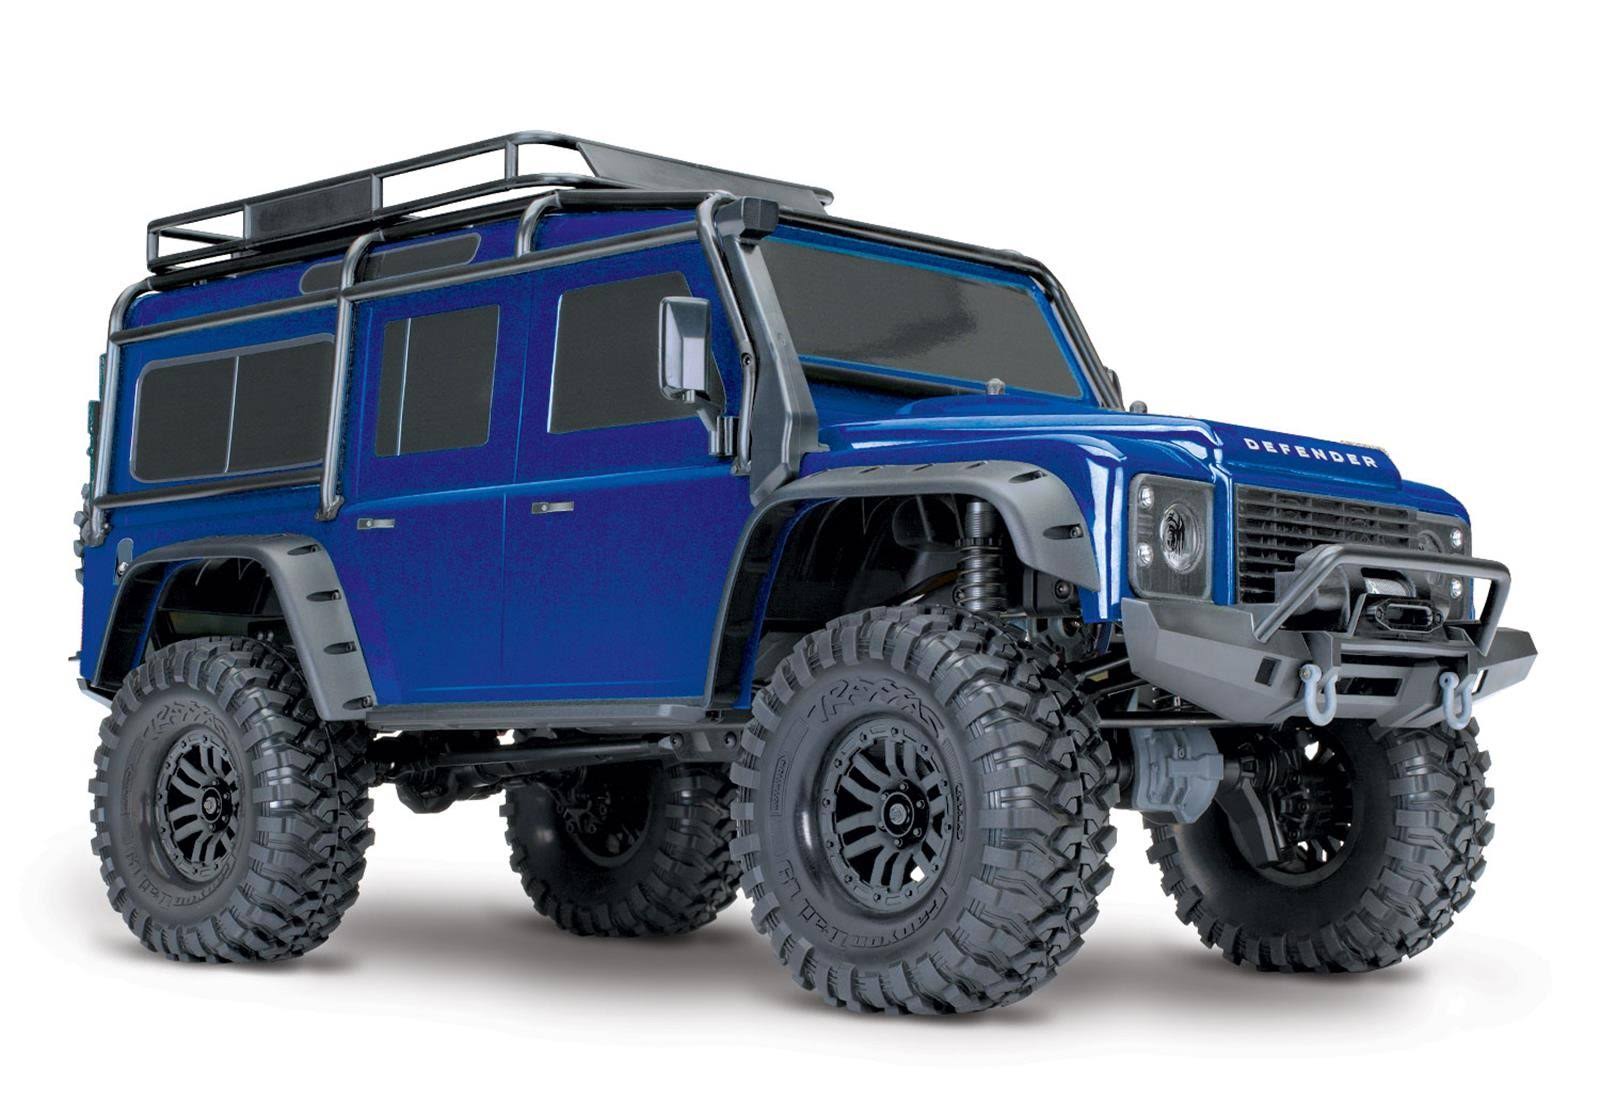 Traxxas TRX-4 Scale and Trail Crawler Defender - Blue, 82056-4